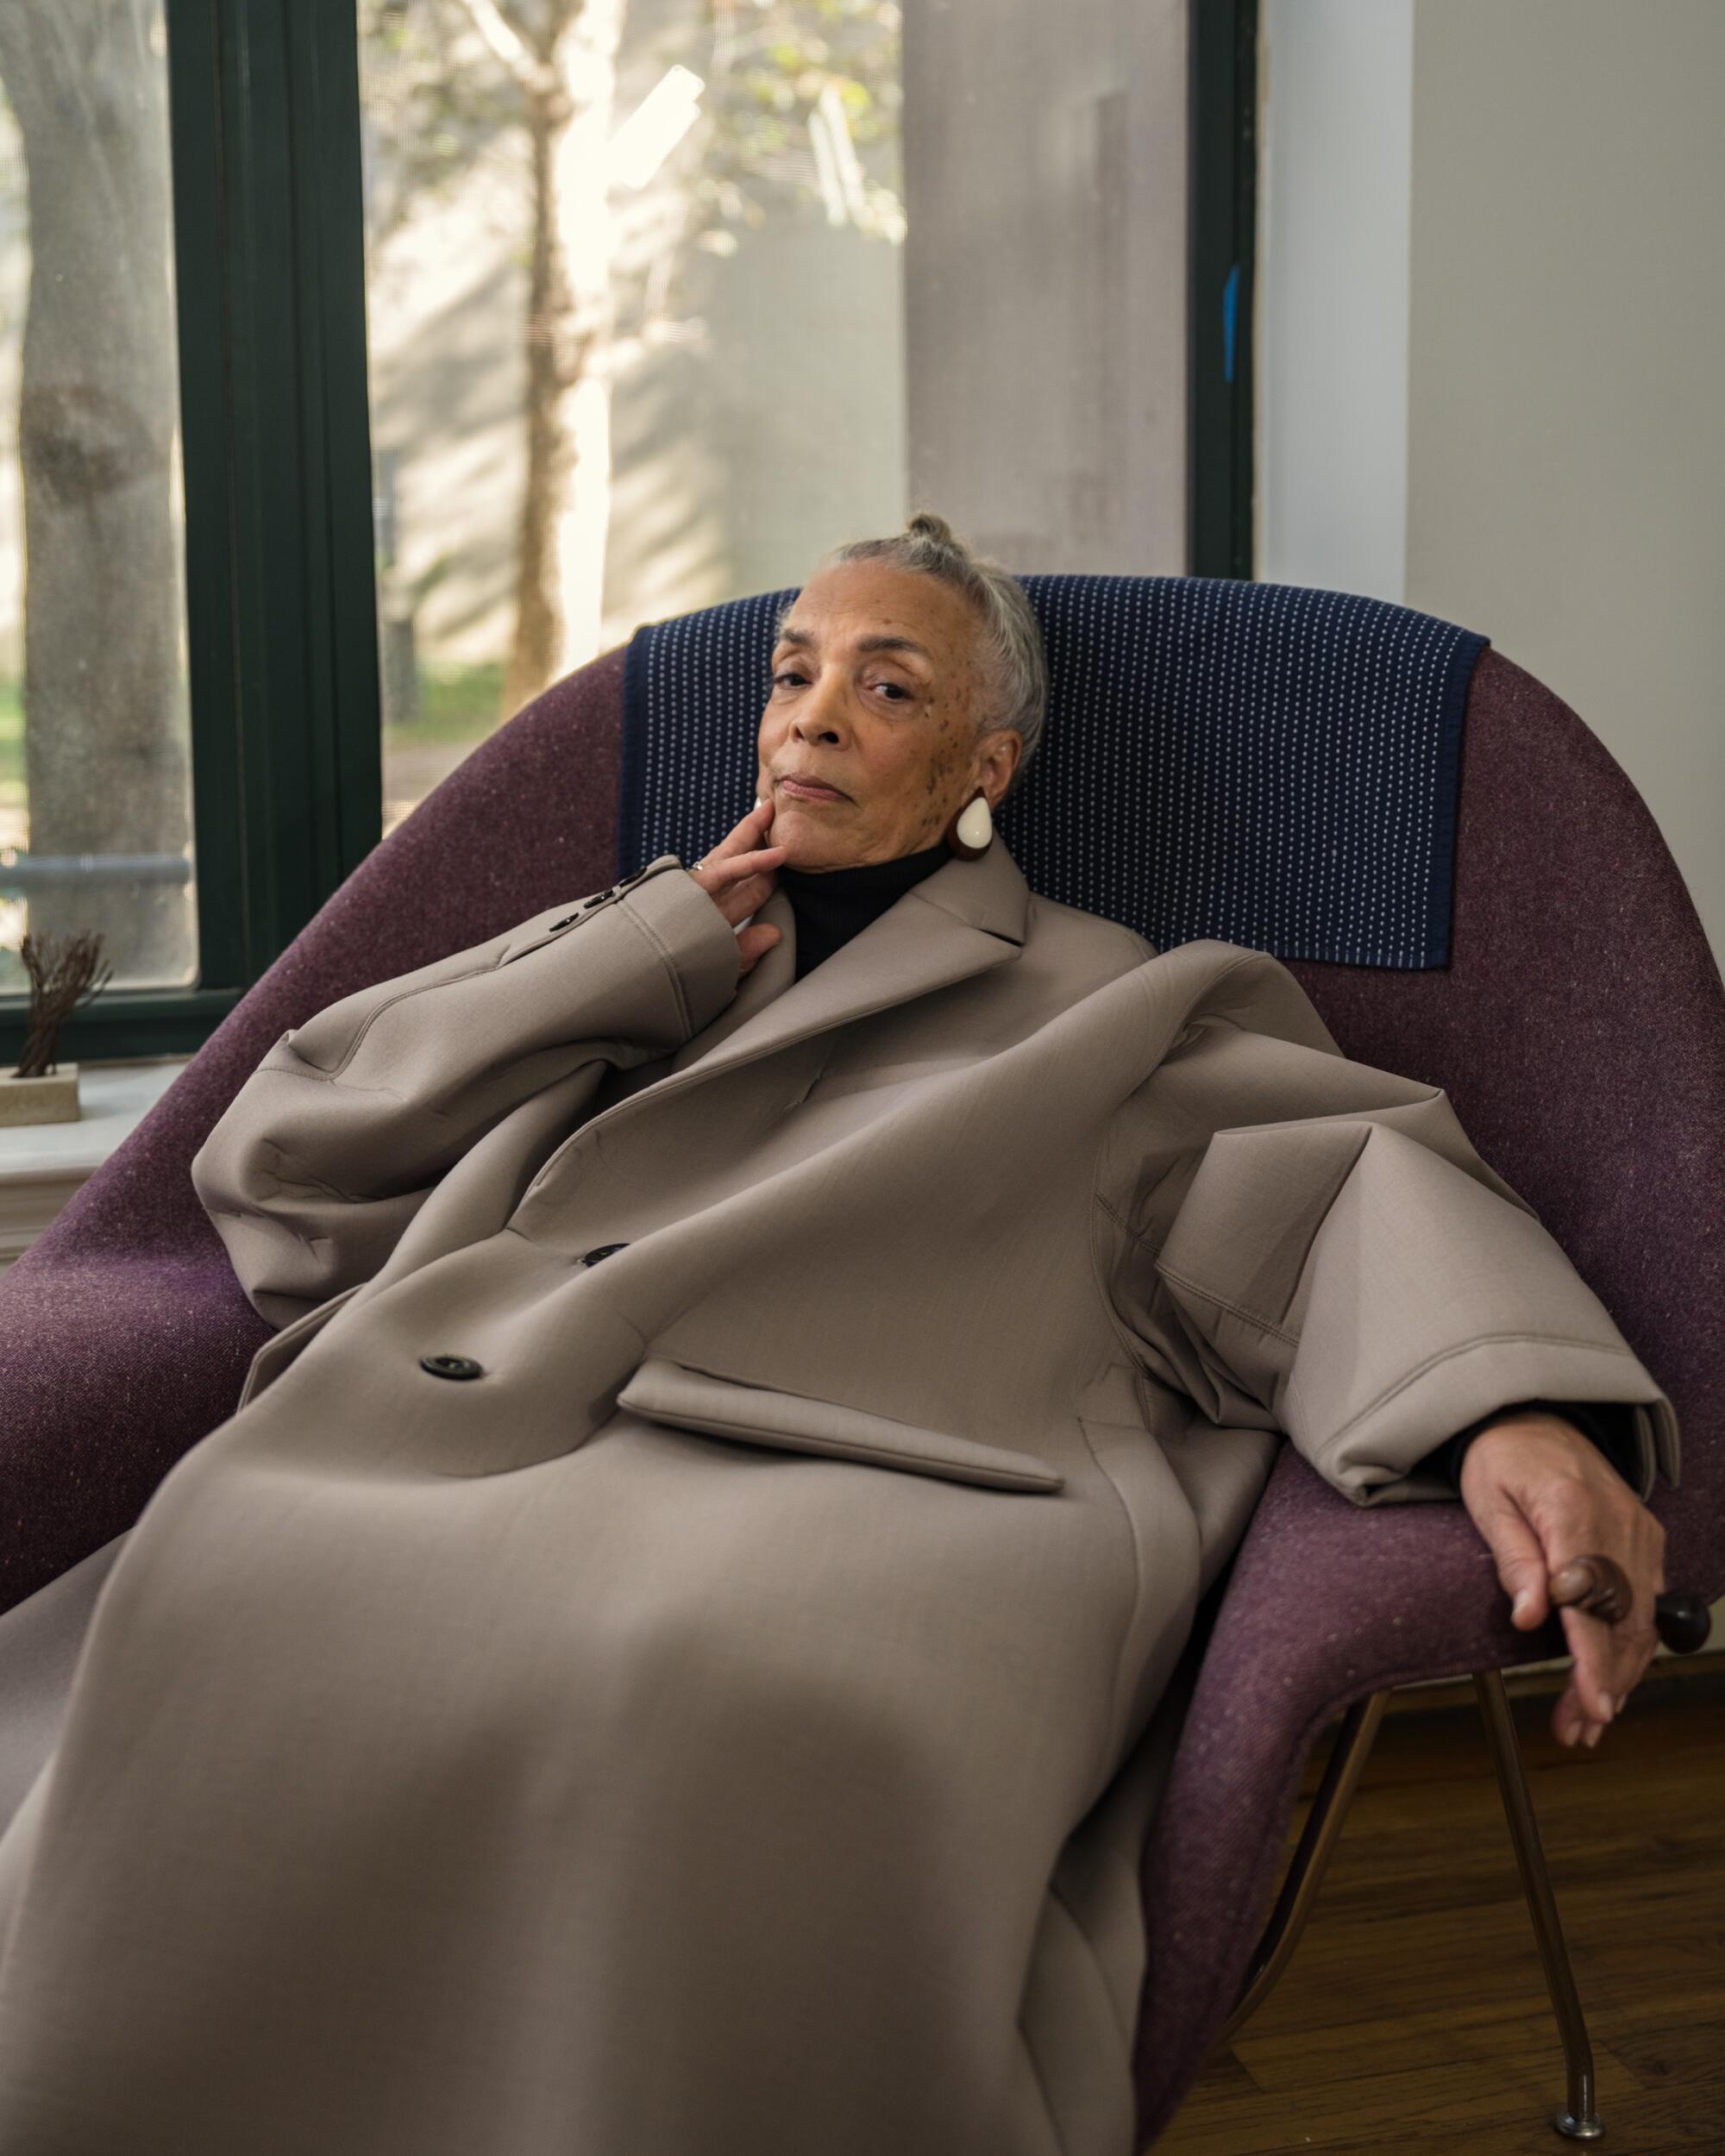 A woman, wearing an oversized brown jacket, sits on a purple chaise.